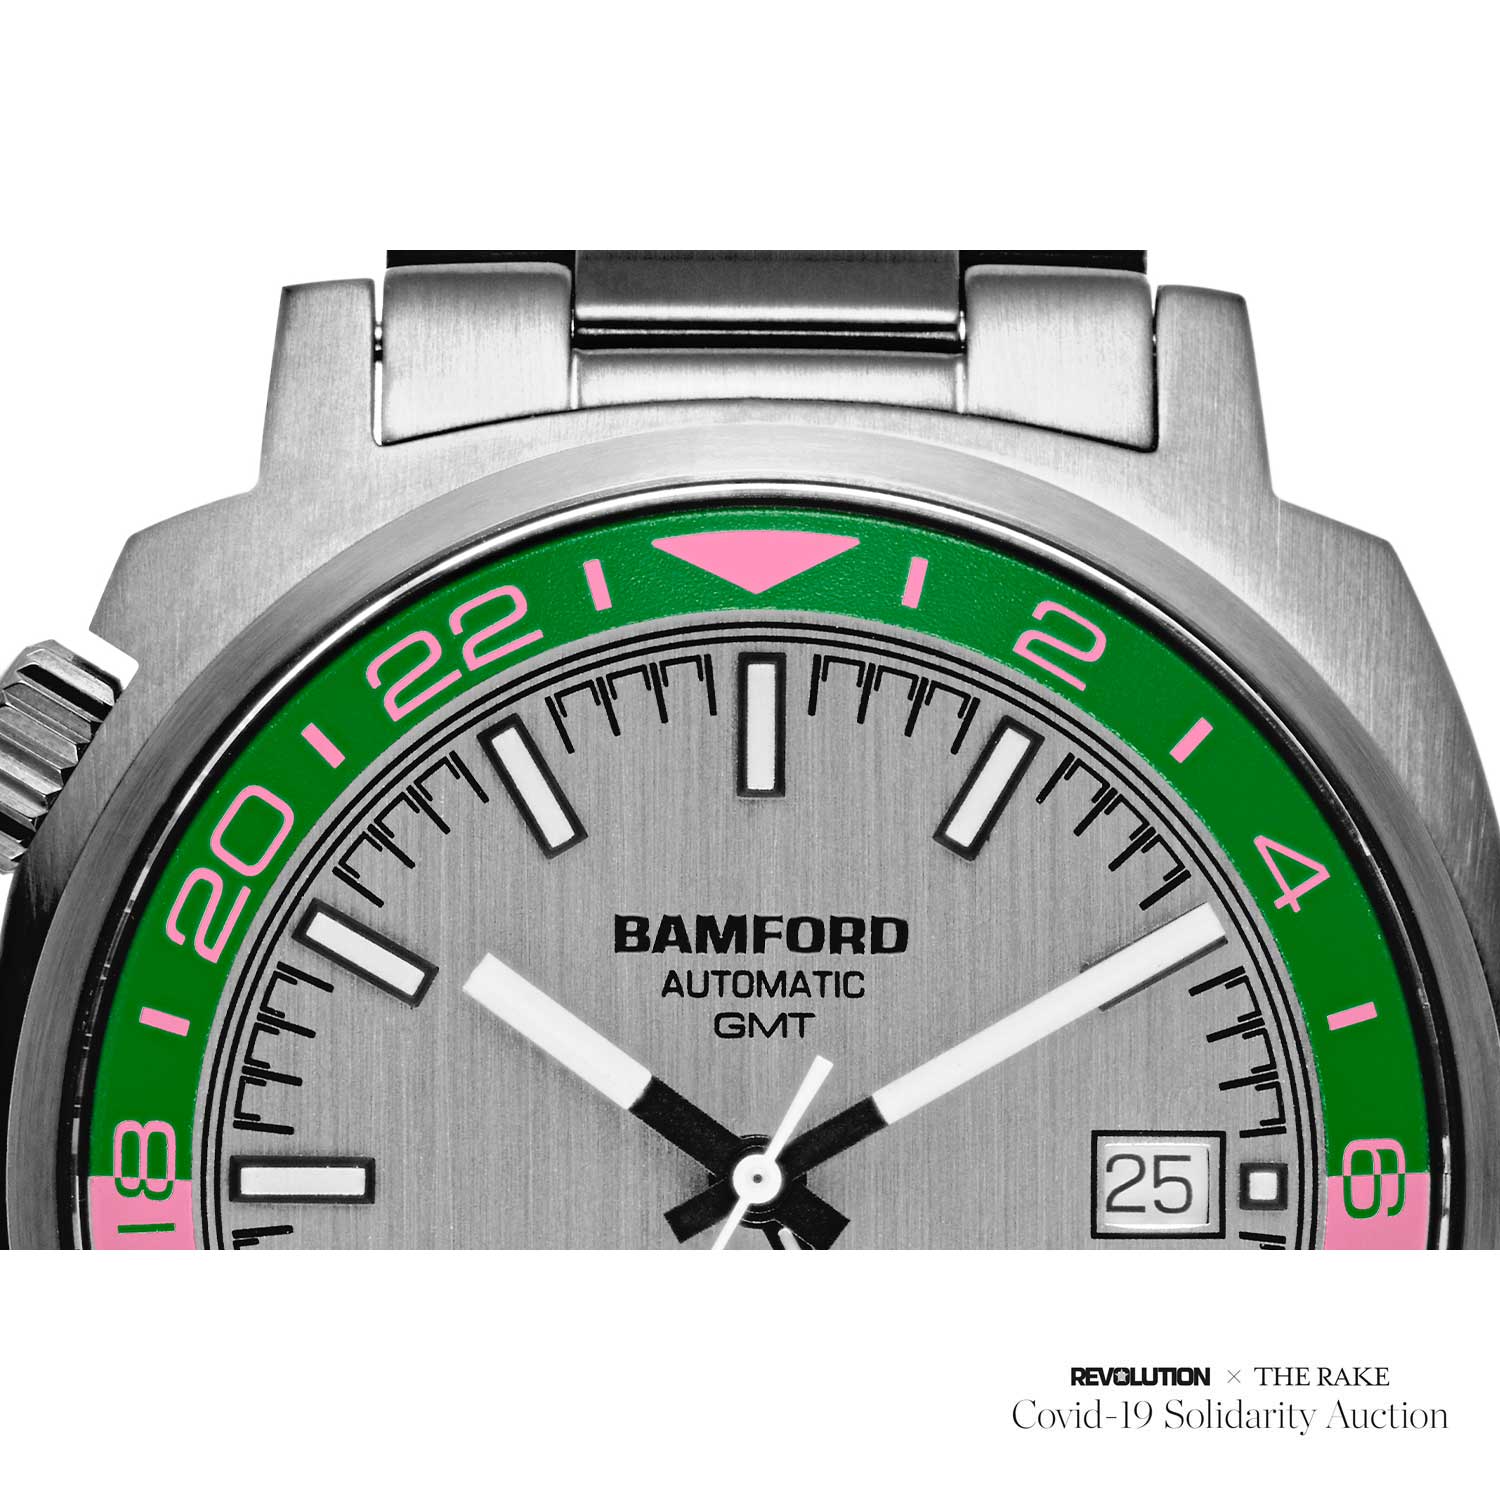 Unique Pink and Green Bamford GMT for Revolution x The Rake Covid-19 Solidarity Auction